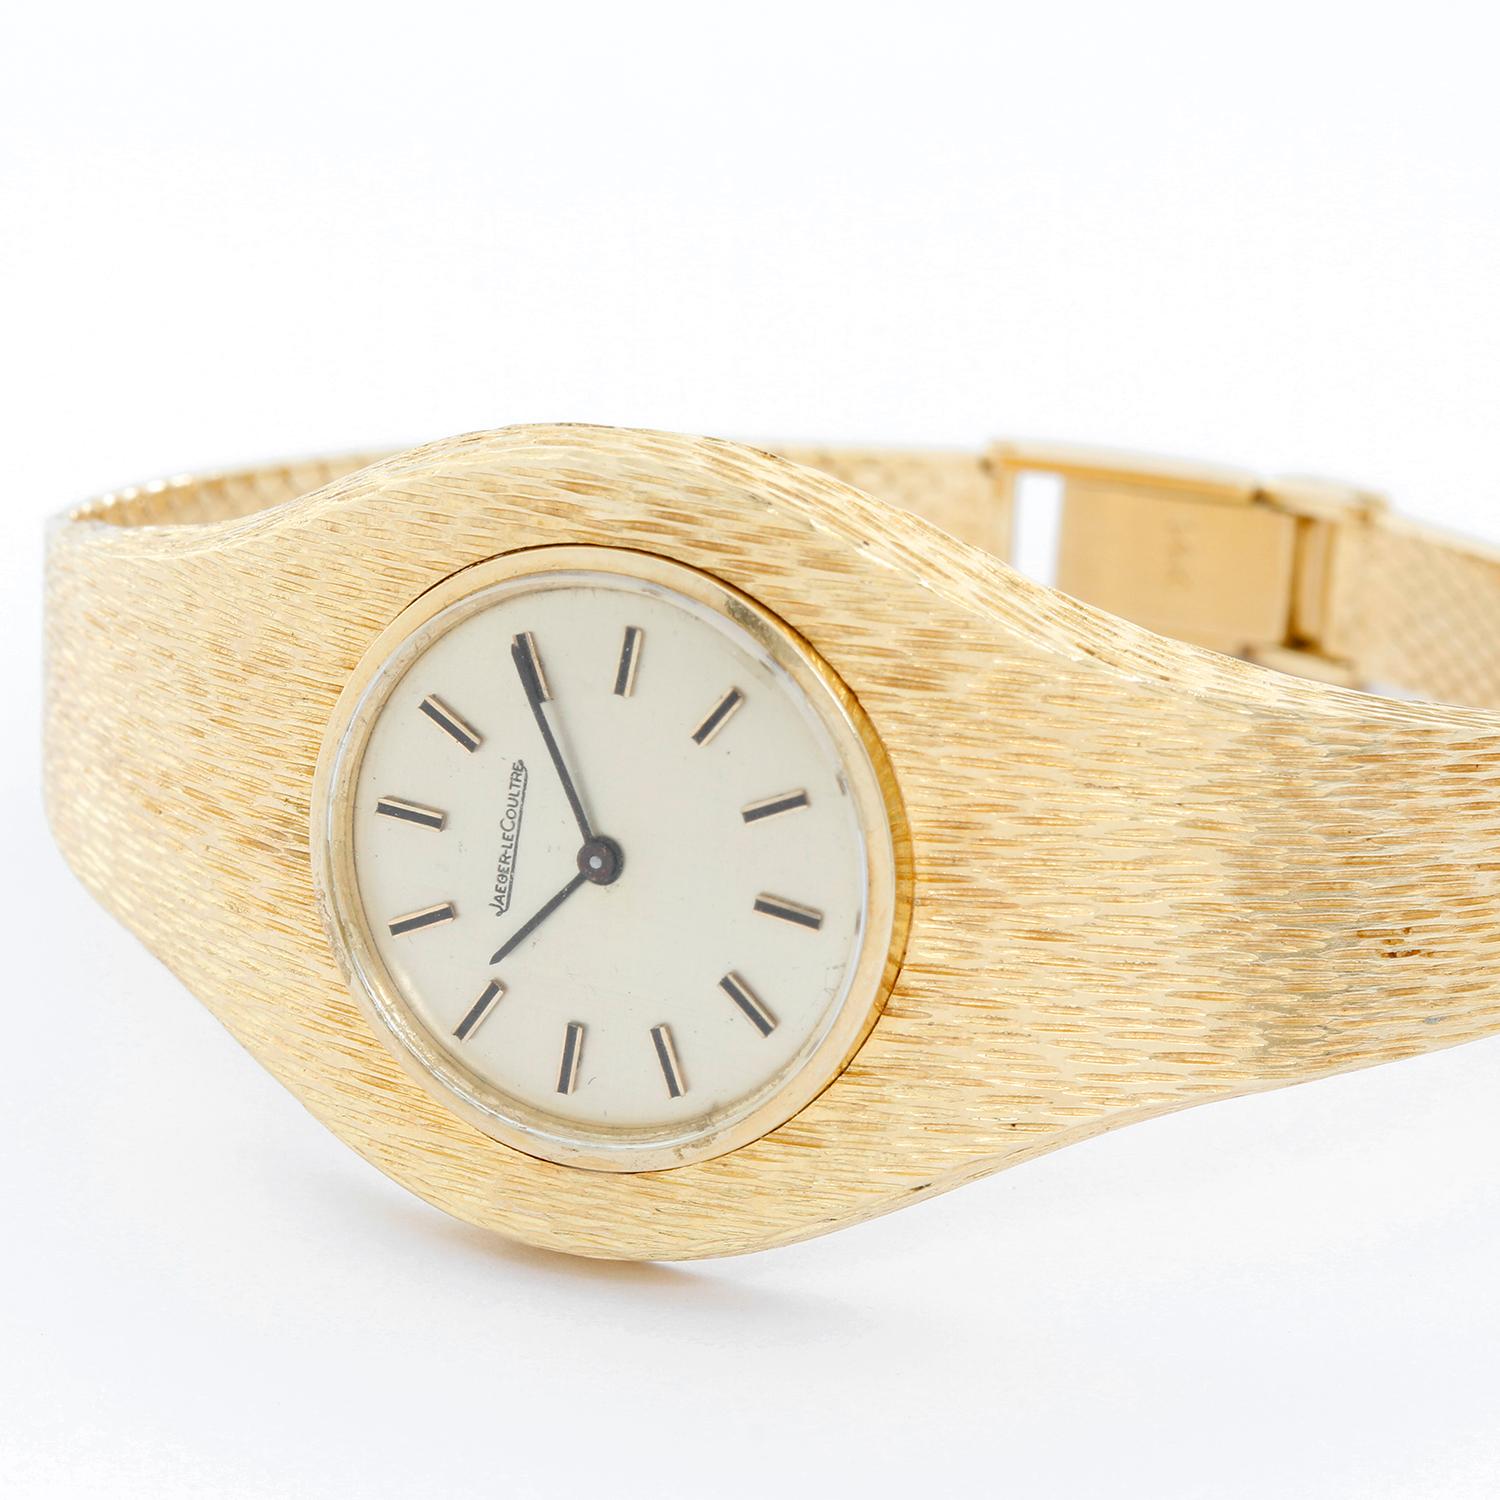 Ladies Vintage Jaeger-LeCoultre 14k Yellow Gold Ladies Retro Style Watch -  Manual winding. 14k yellow gold textured finish case (29mm). Champagne linen finish dial with gold stick markers. Integrated textured 14k yellow gold bracelet (will fit apx.